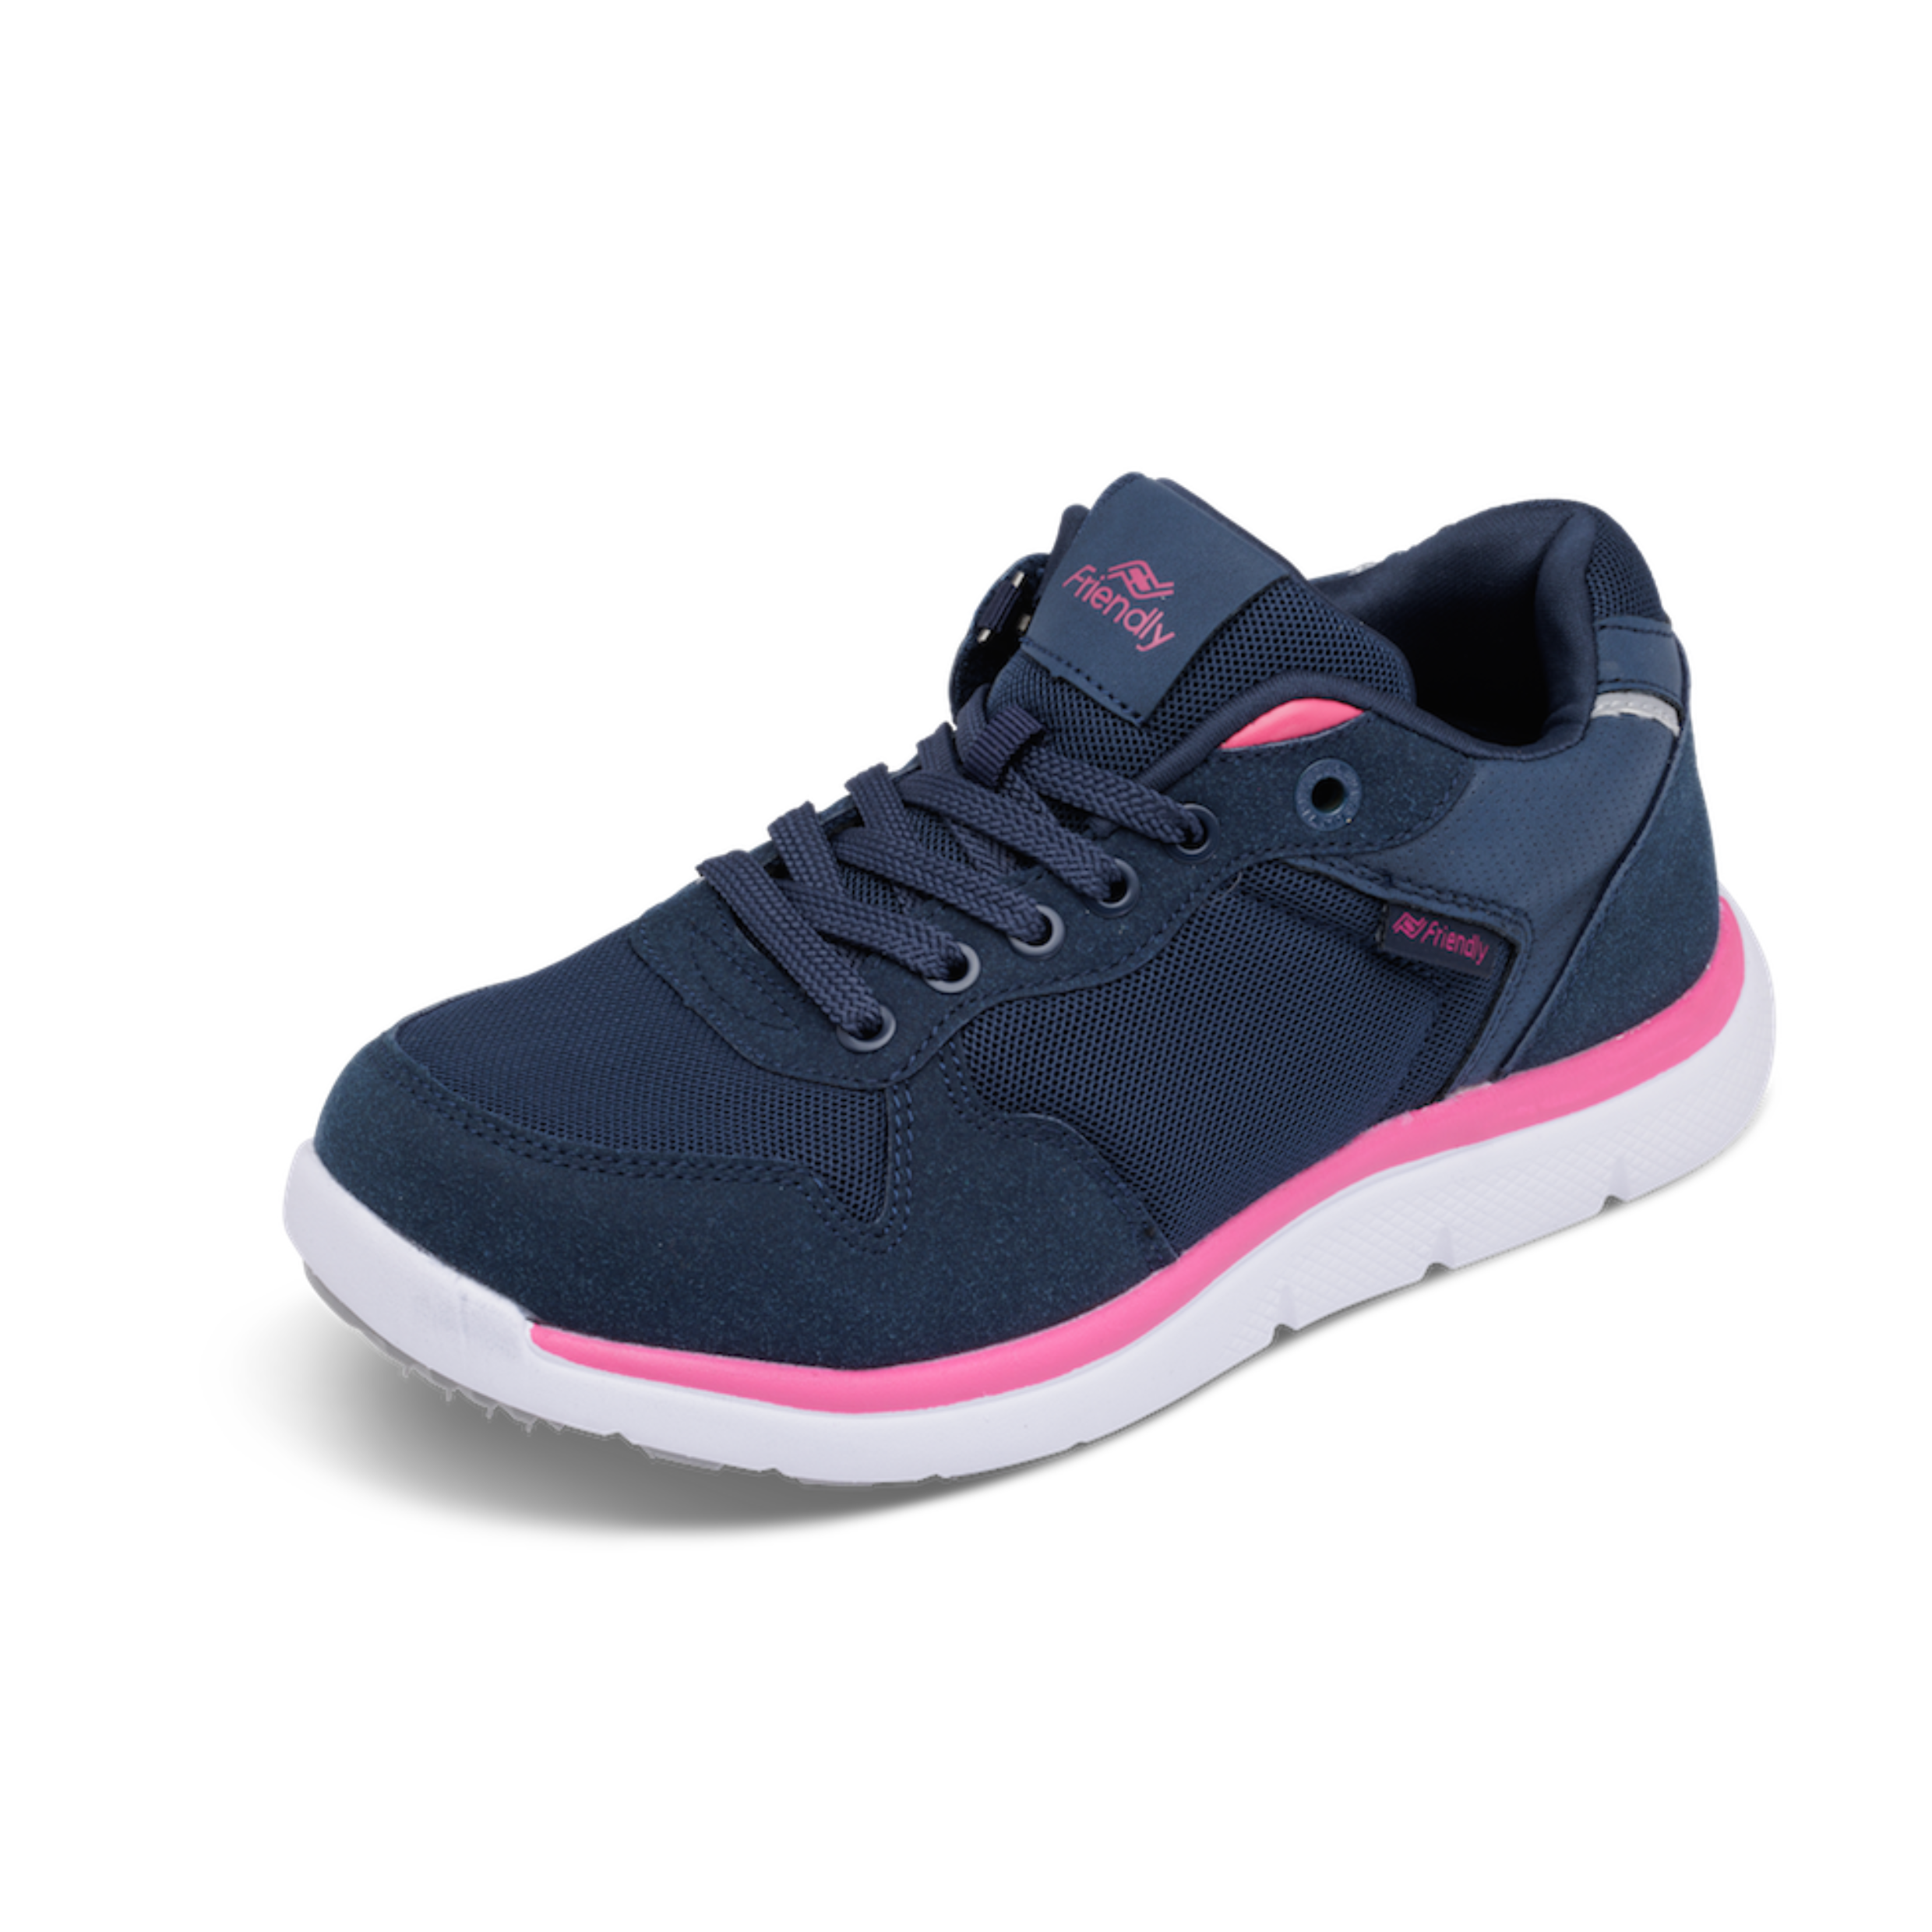 Friendly Shoes Excursion (Women's) - Low Top Navy / Pink